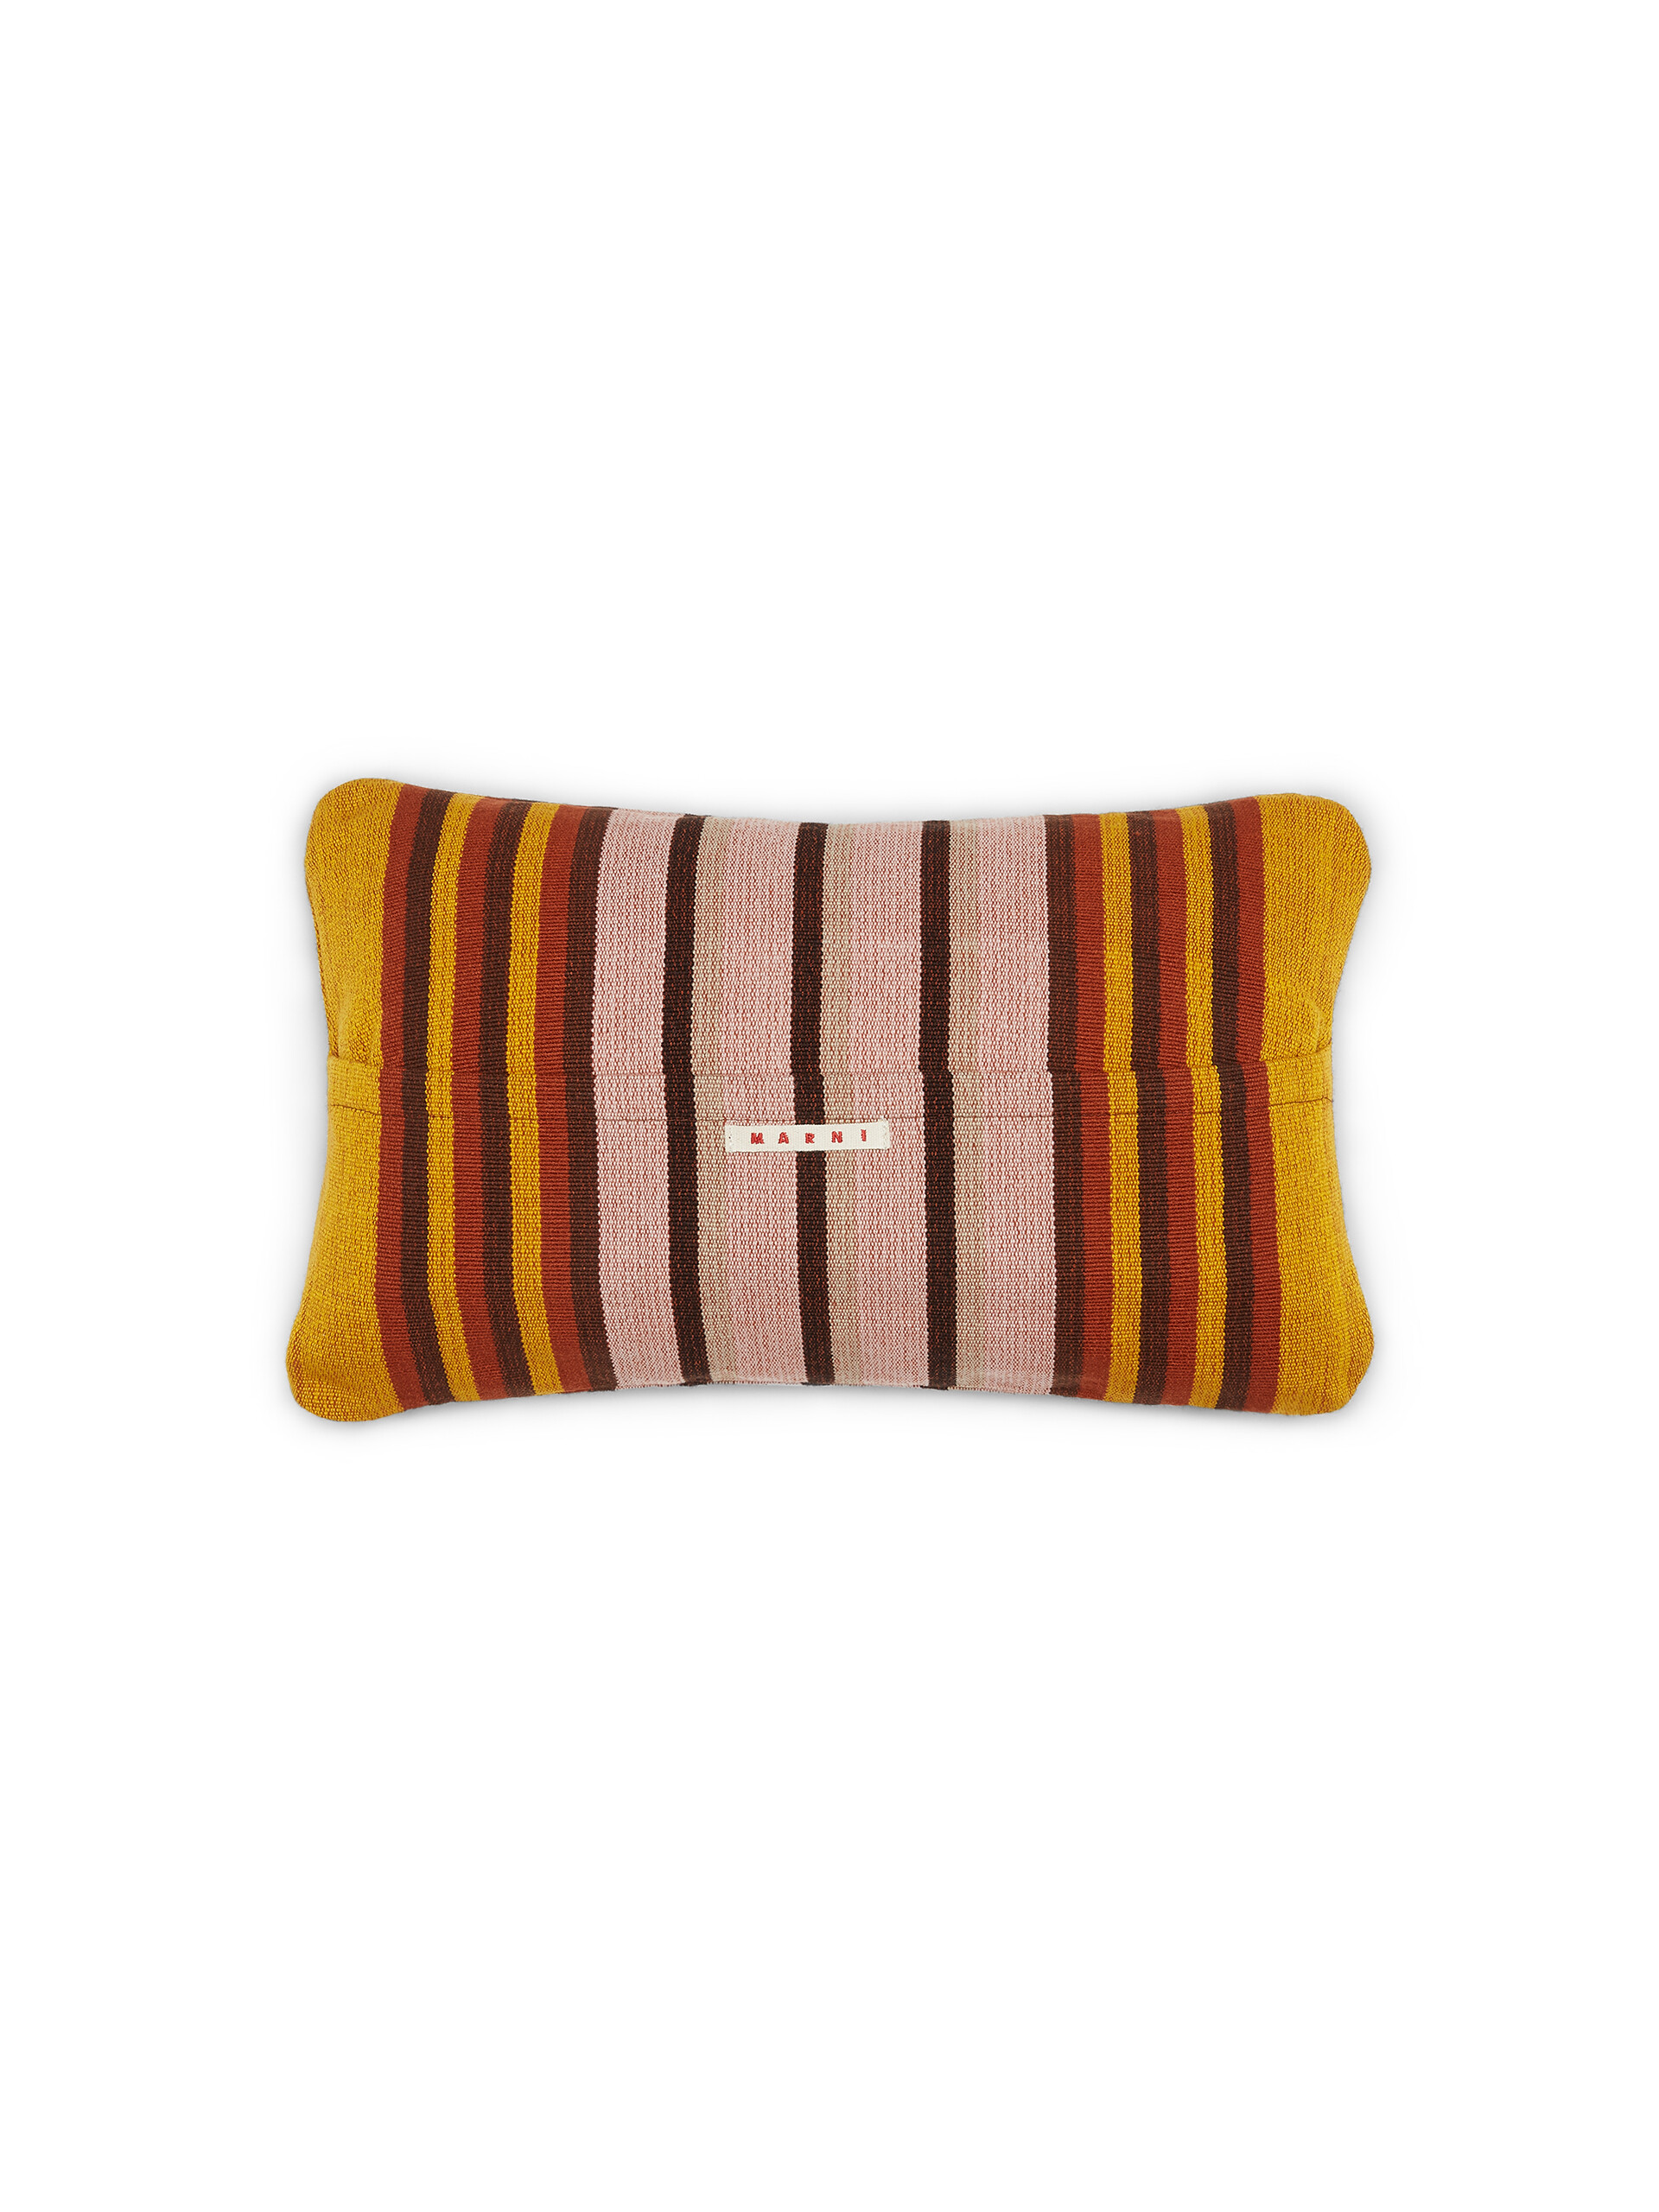 MARNI MARKET rectangular pillow cover in polyester with yellow pink and brown vertical stripes - Furniture - Image 2